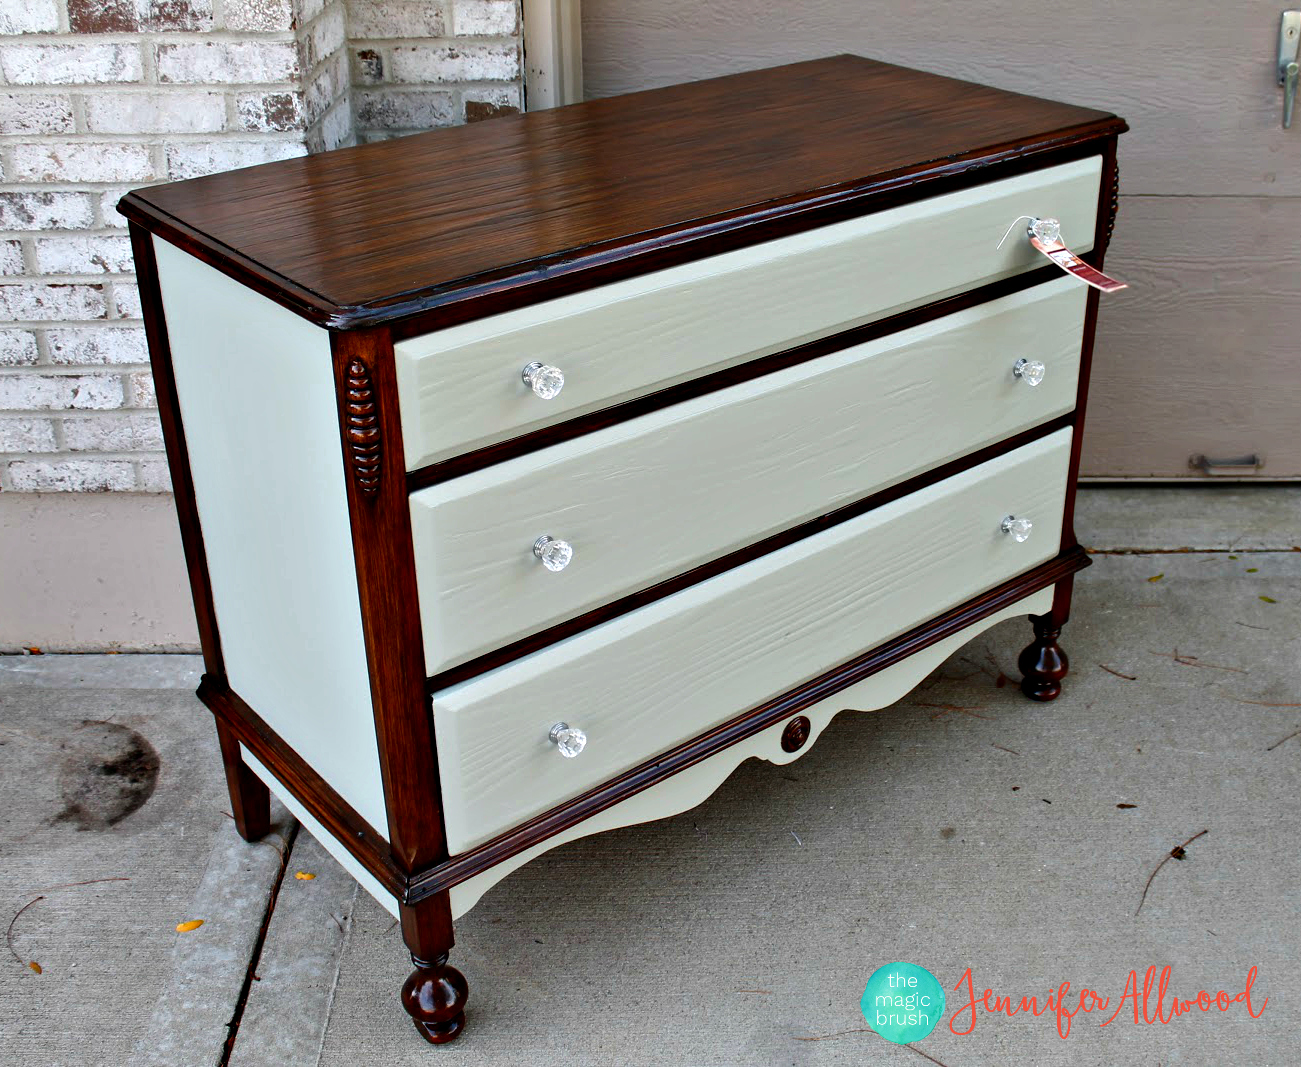 A Lovely Painted And Stained Dresser, Painted Dresser With Wood Stained Drawers